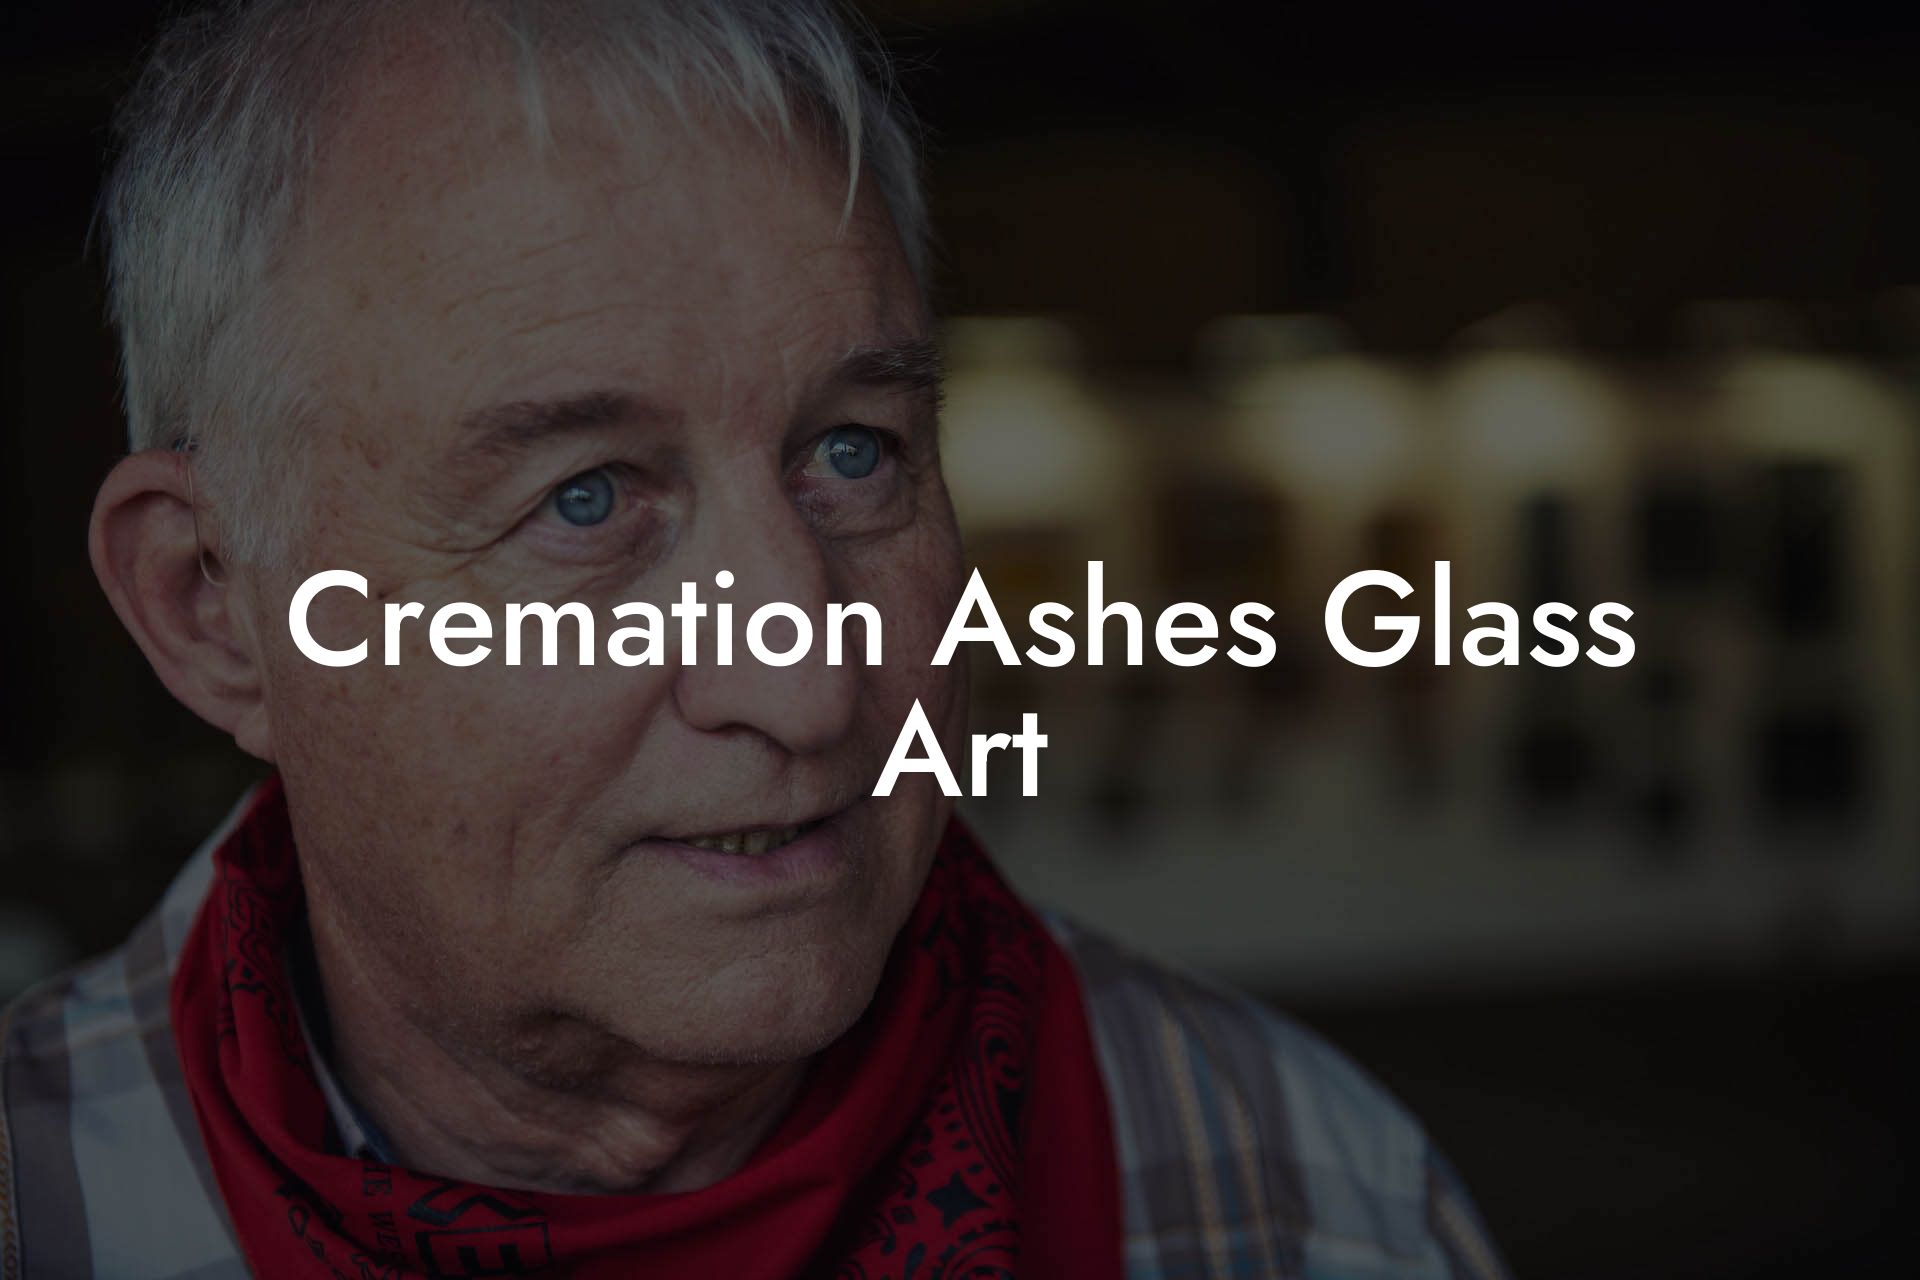 Cremation Ashes Glass Art